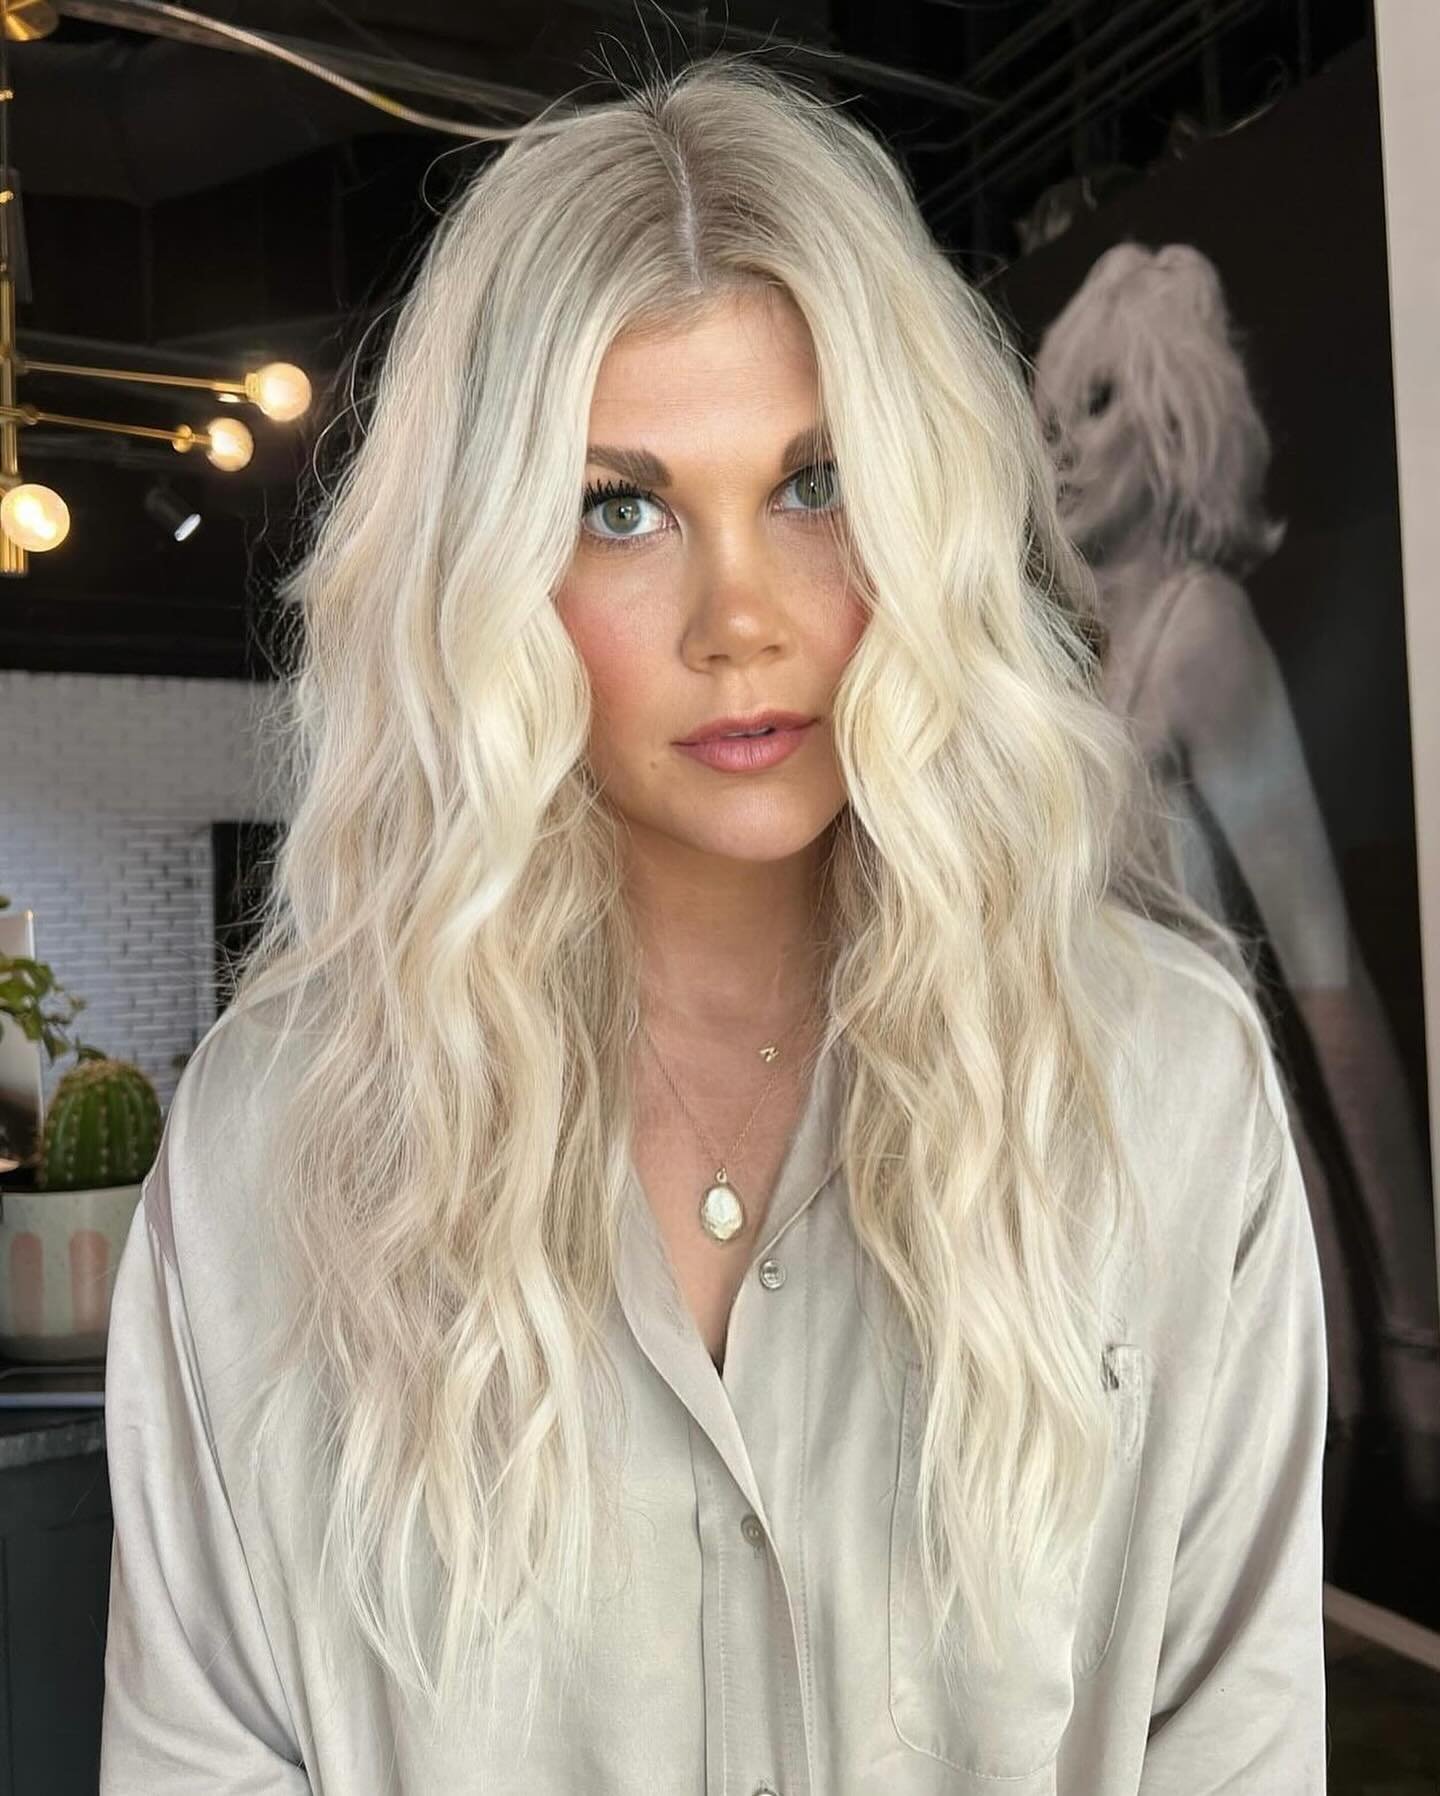 Summer is almost here! Keep your extensions looking AMAZING✨ allllll summer long with sunscreen safe for hair extensions by @harperellishairco 💛 available now at Blonde! 

Hair by the one and only @michellegamboahair 🤩 #harperellishairco #nwastylis